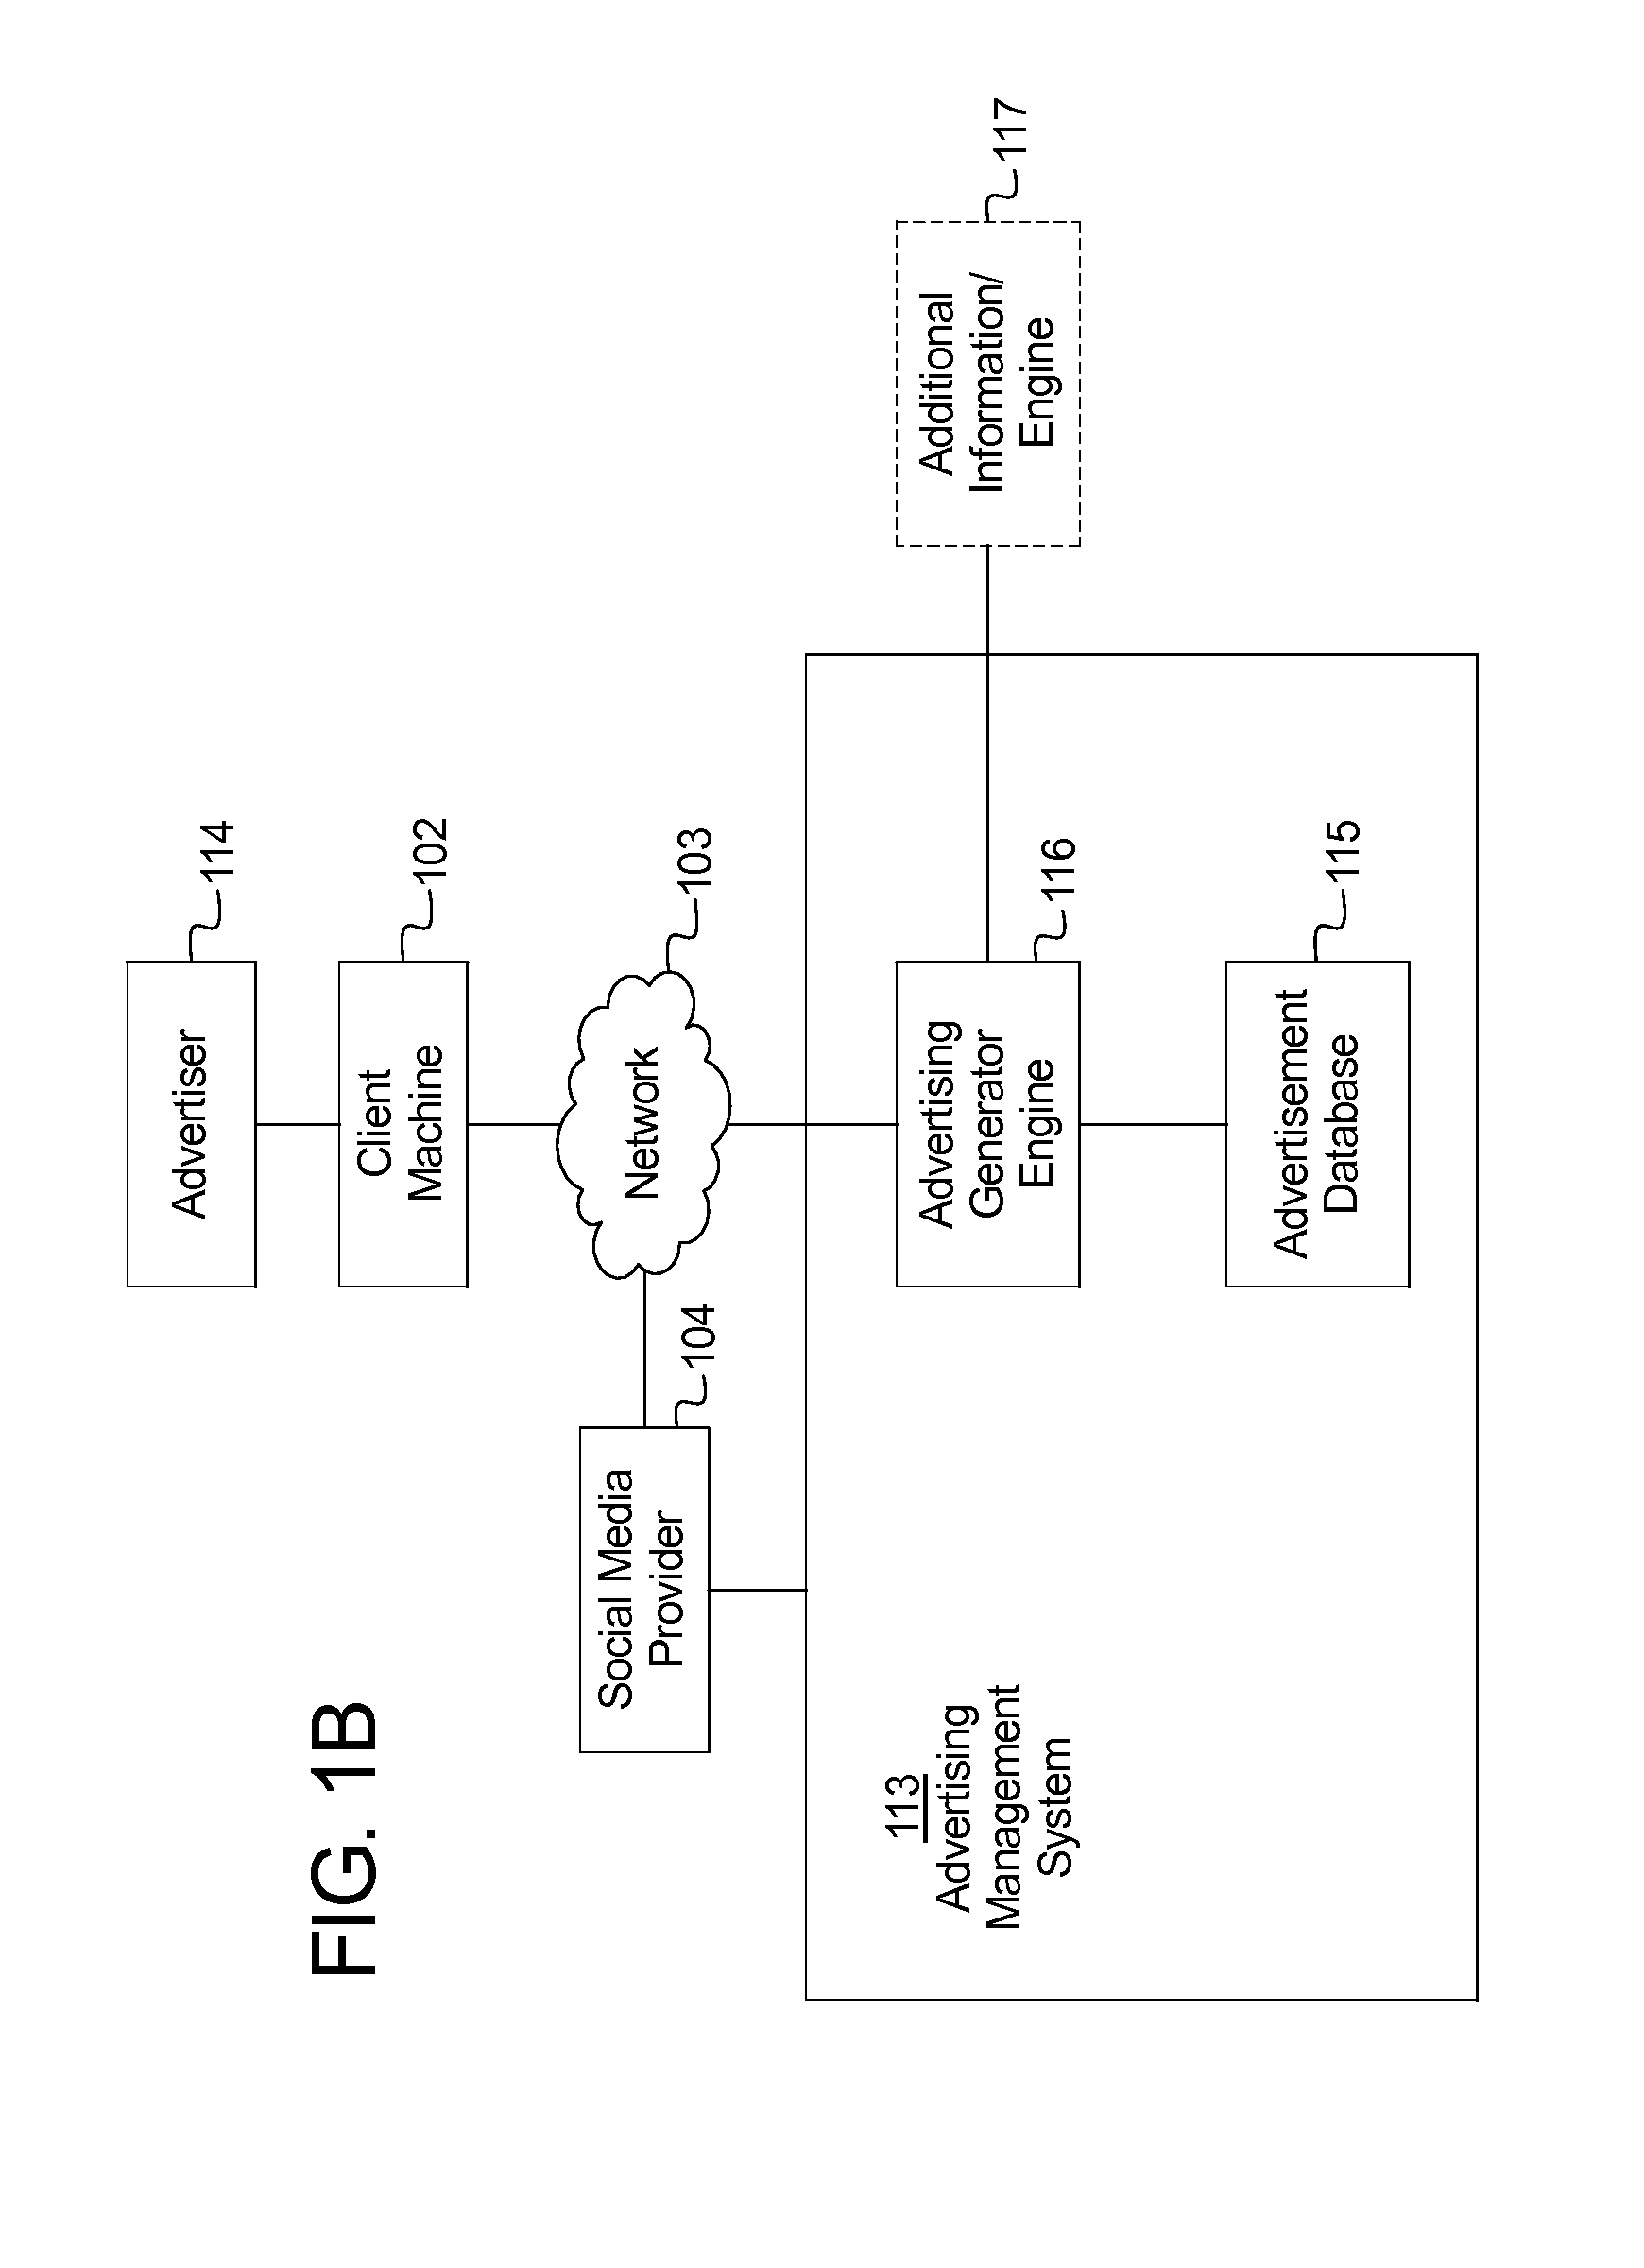 Systems and methods for organizing and displaying social media content